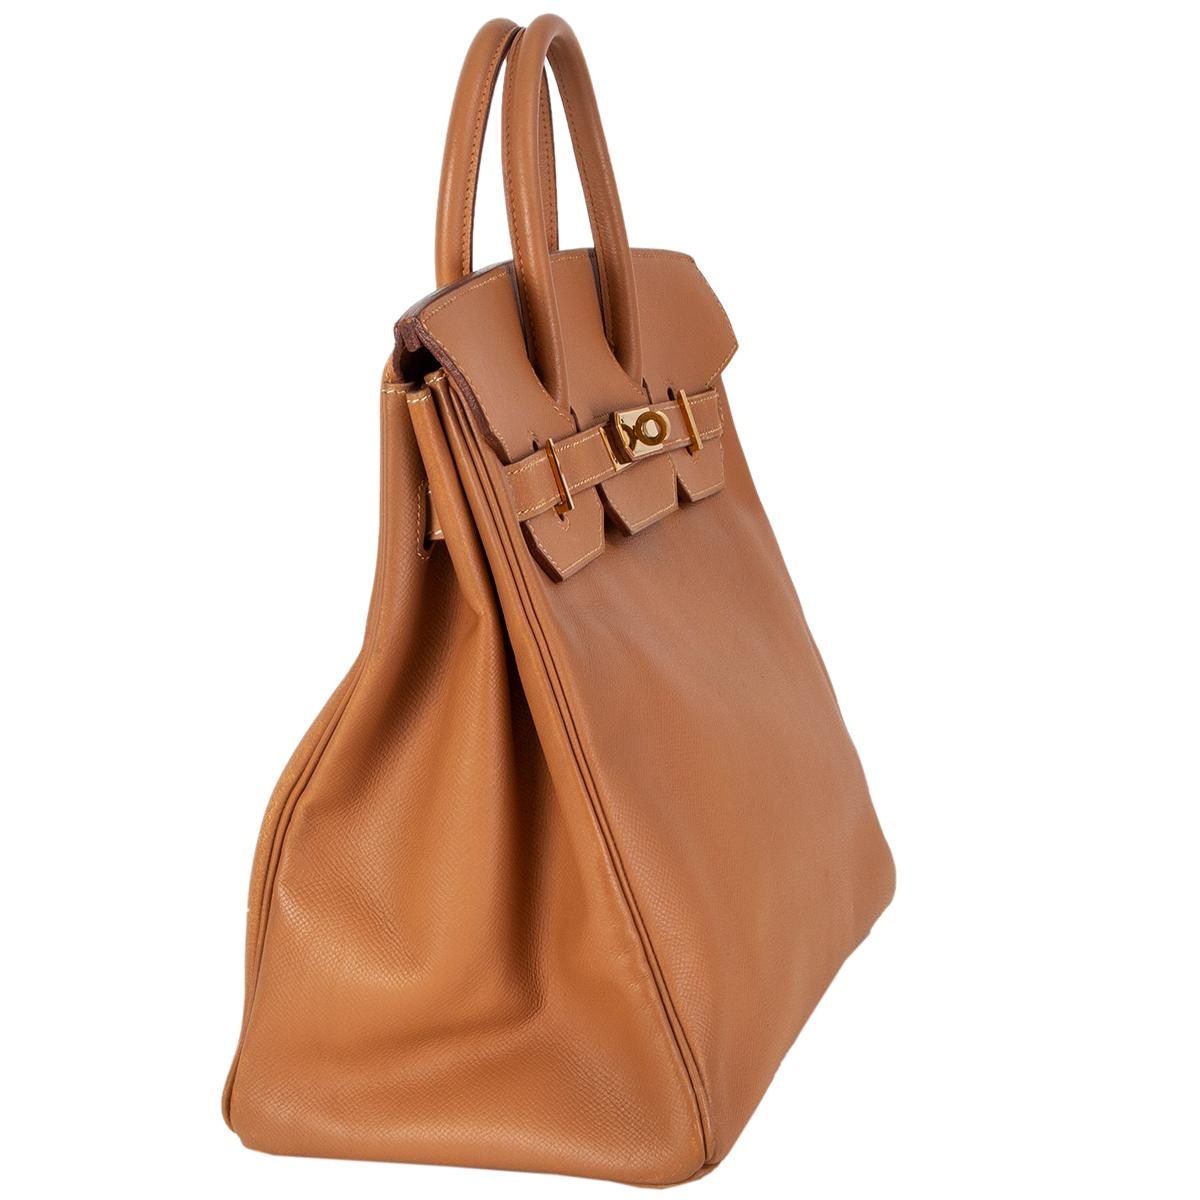 Hermes 'Haut a Courroies 32 HAC' bag in Naturel Veau Epsom leather with gold-plated hardware. Lined in Chevre (goat skin) with an open pocket against the front and a zipper pocket against the back. Has been carried some light wear on the handles and